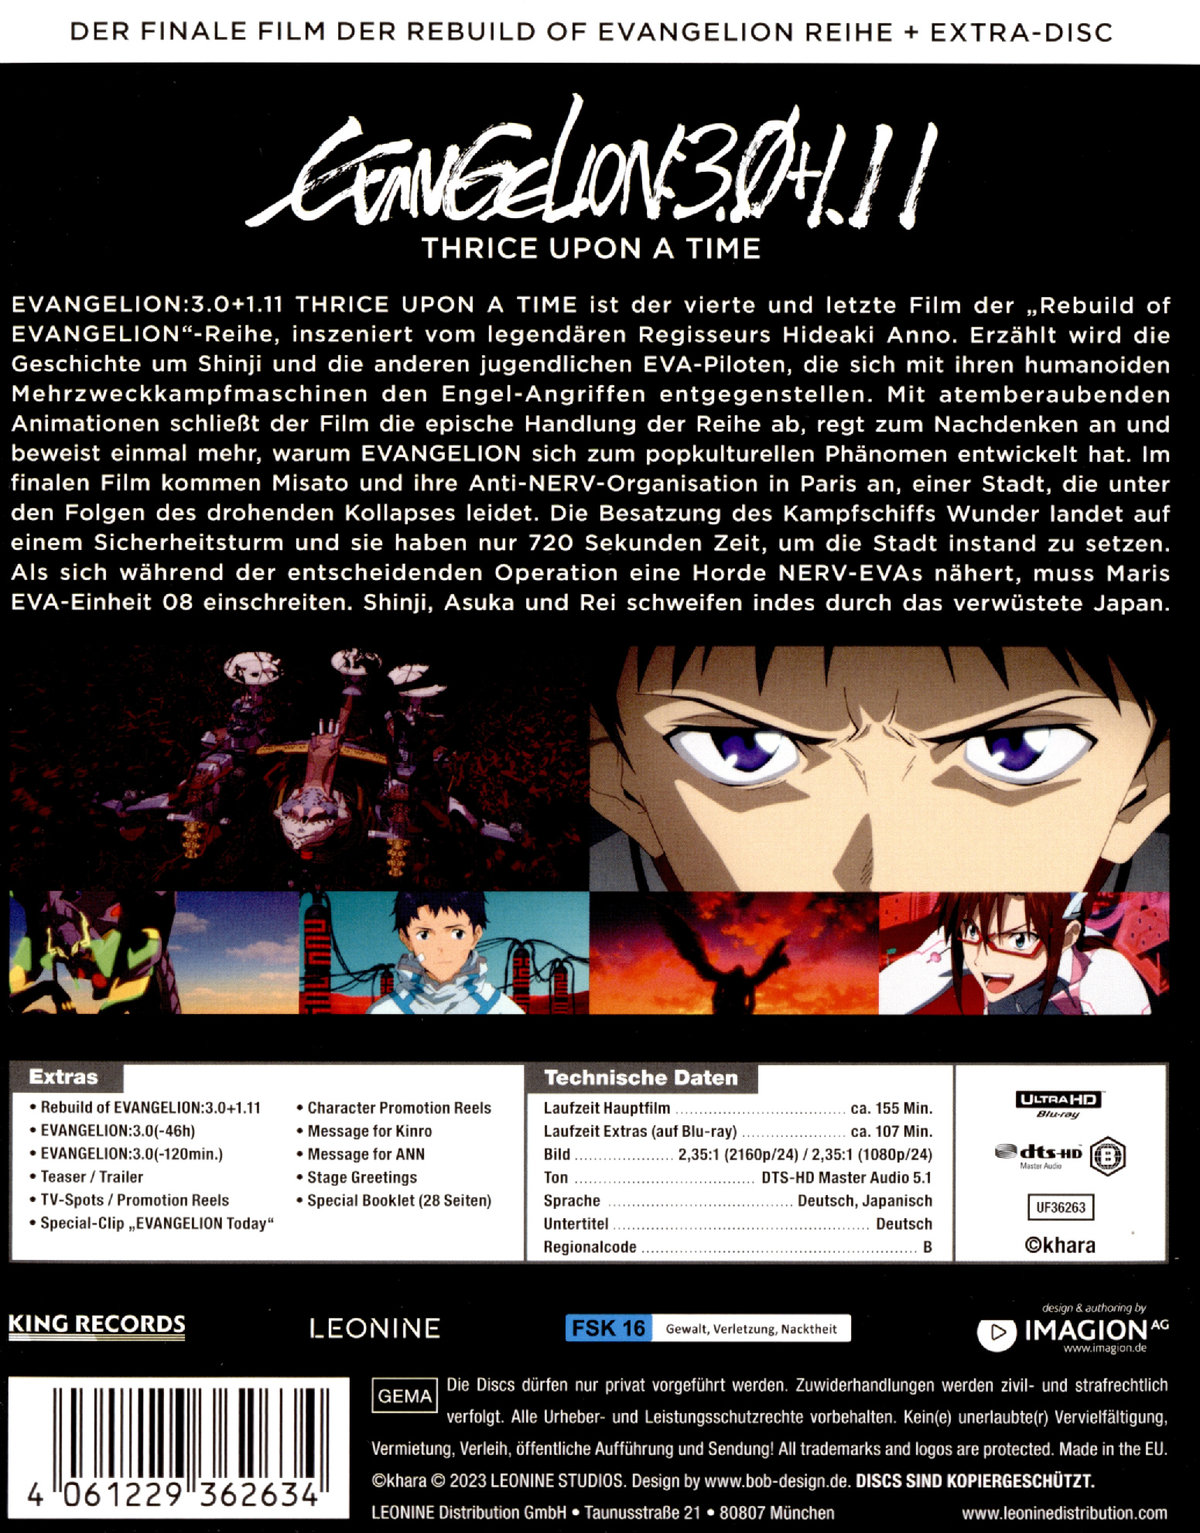 Evangelion: 3.0+1.11 Thrice Upon a Time - Uncut Mediabook Edition (4K Ultra HD+blu-ray)